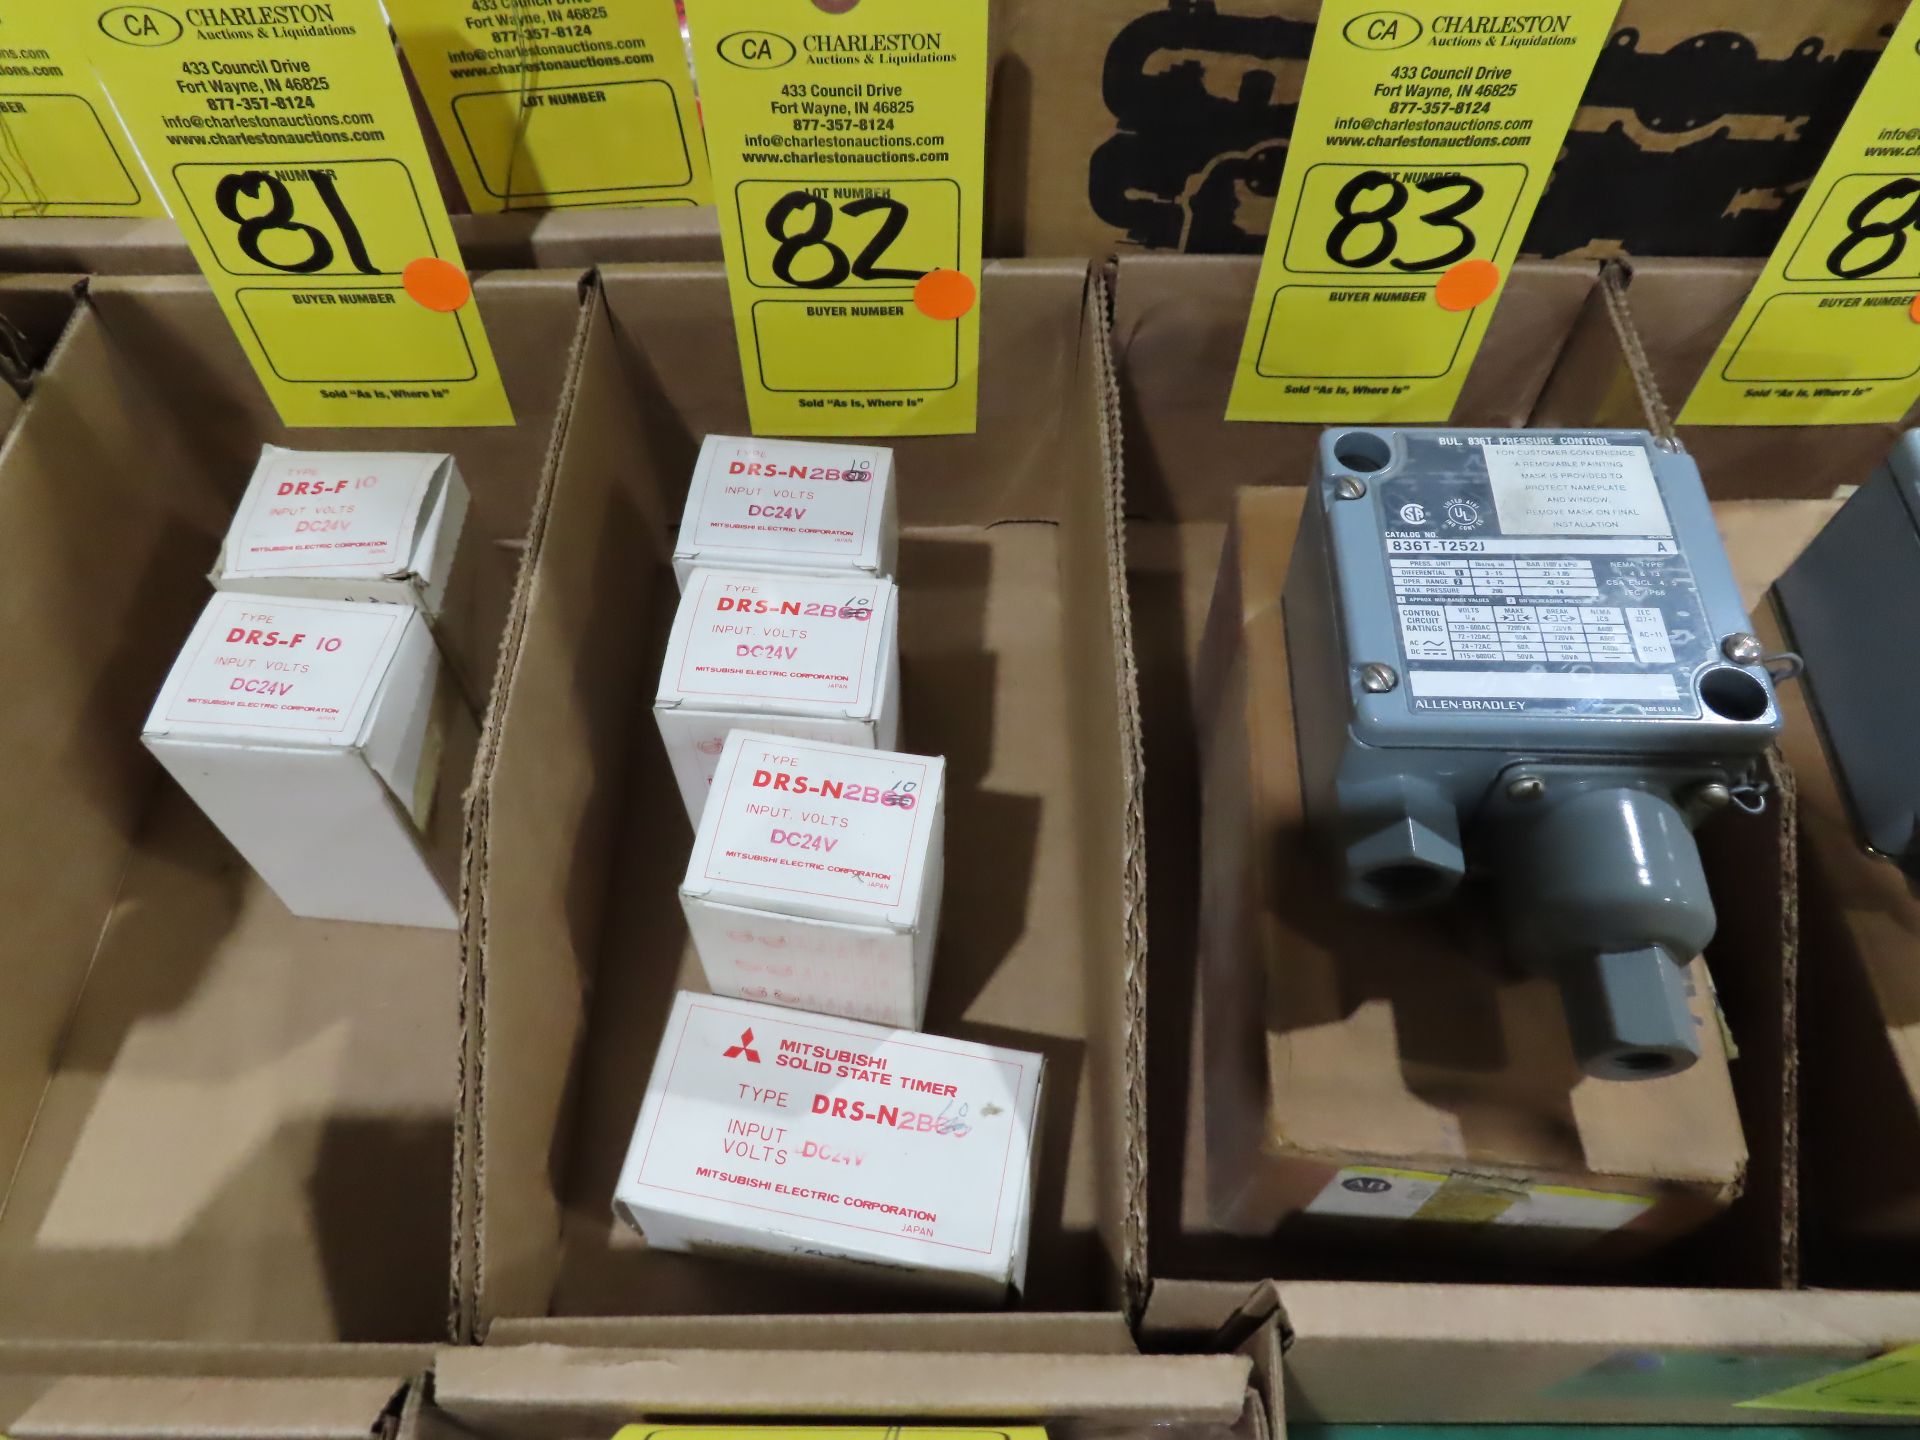 Qty 4 Mitsubishi model DRS-N2B10, new in boxes, as always with Brolyn LLC auctions, all lots can